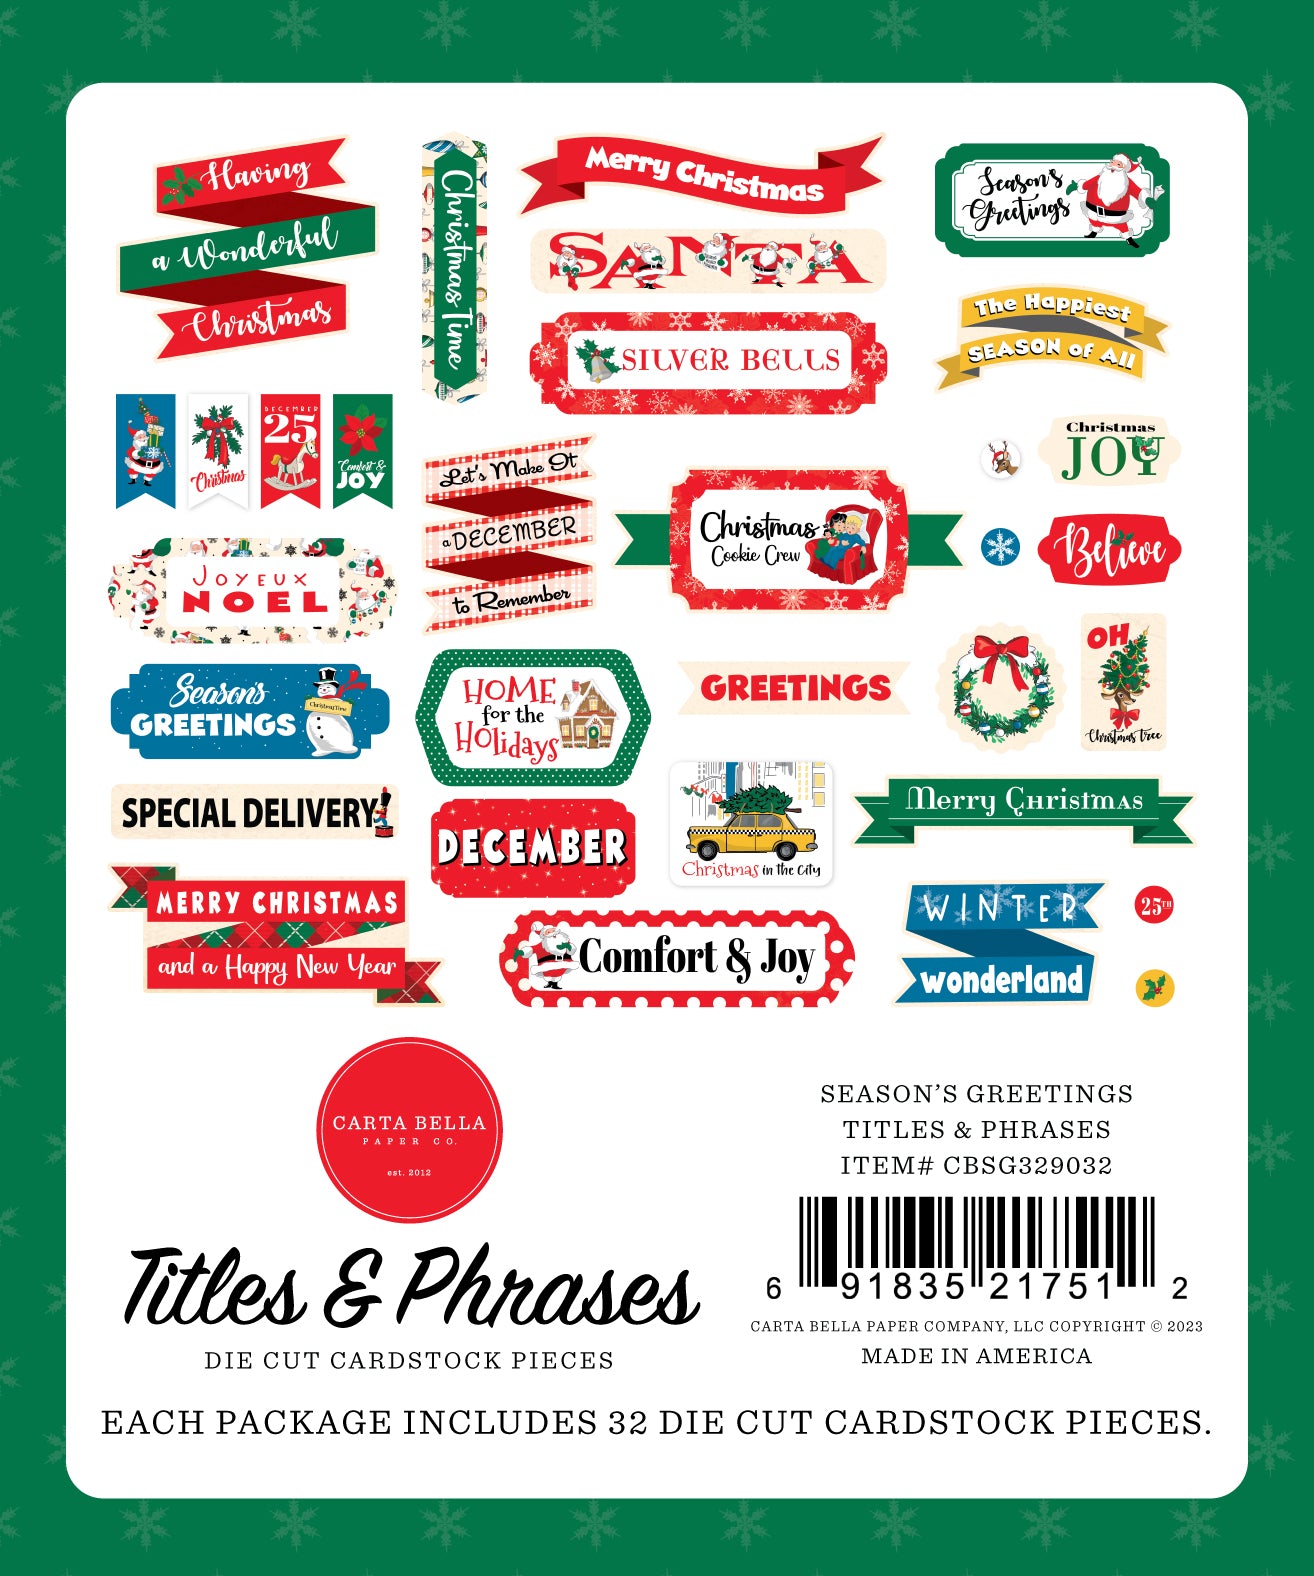 Season's Greetings Collection Scrapbook Titles & Phrases by Carta Bella